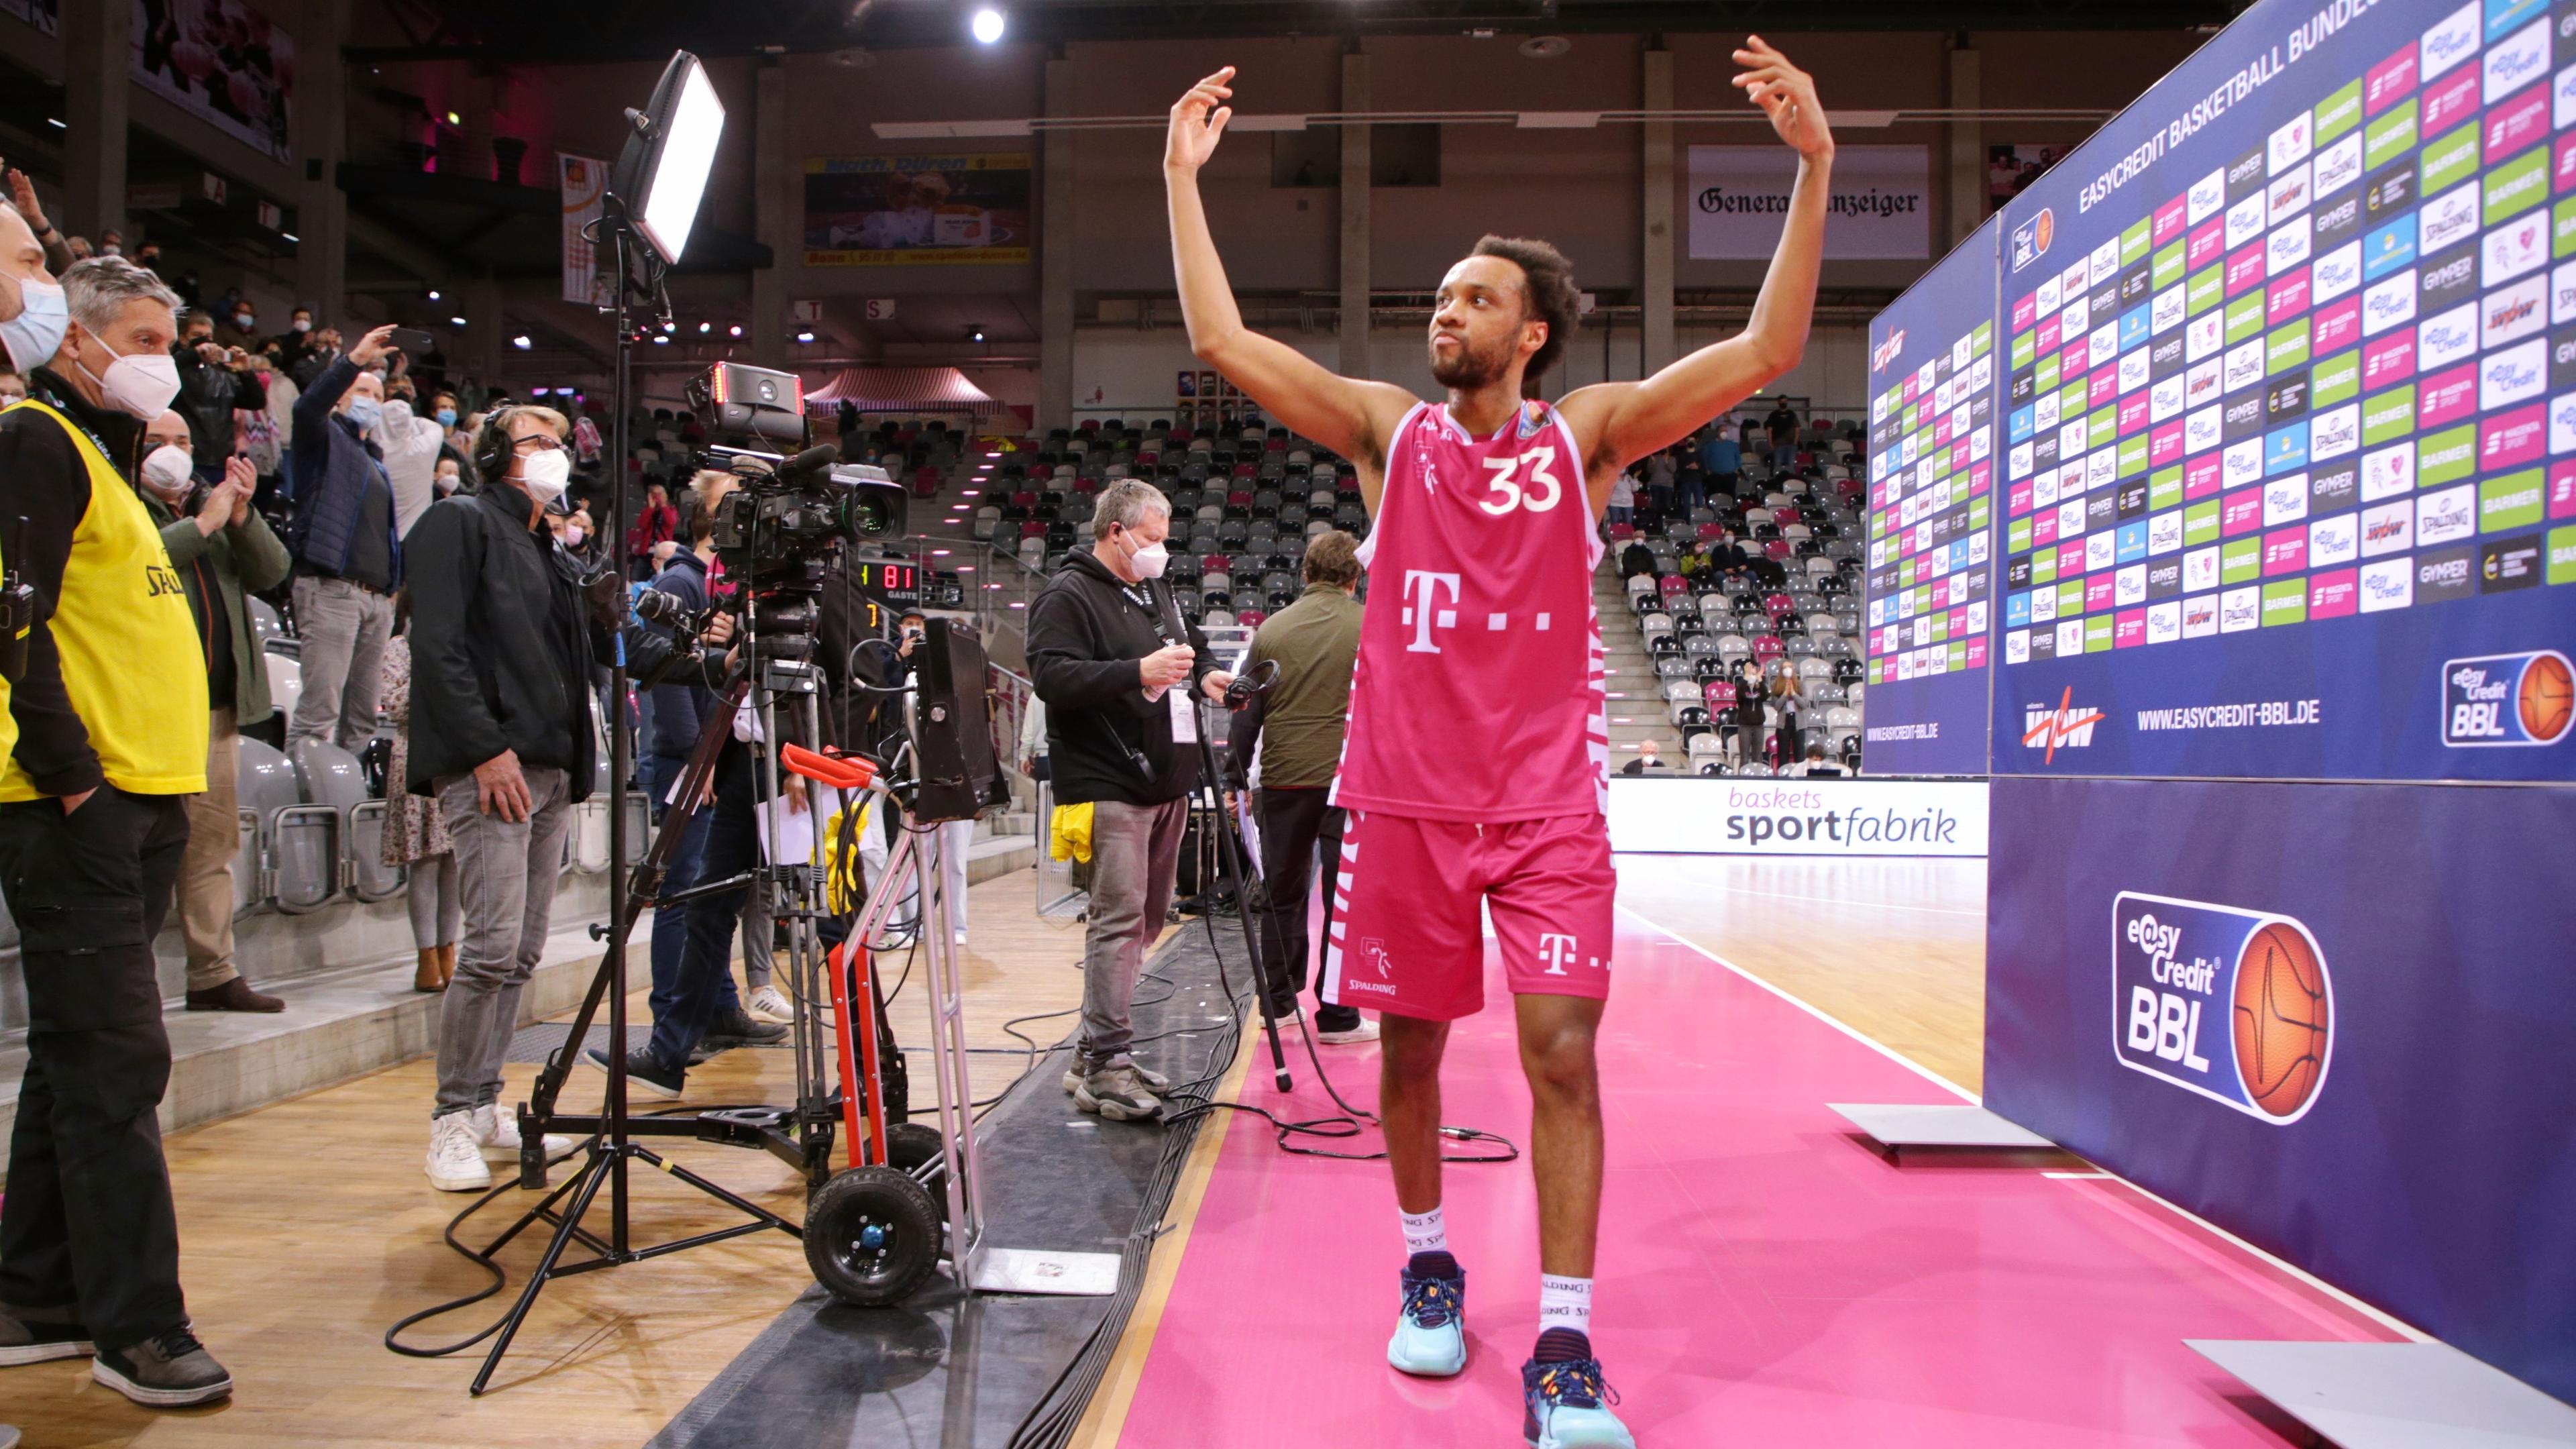 This week had a couple of game-winners late but the biggest highlight was Parker Jackson-Cartwright continuing to make his case for MVP as he dropped 40 points on Brose Bamberg in a big win for Telekom Baskets Bonn. One of the late clutch shots came from the ageless Tremmell Darden in MHP RIESEN Ludwigsburg’s win at ALBA BERLIN. EWE Baskets Oldenburg meanwhile had seen enough and fired head coach Mladen Drijencic.